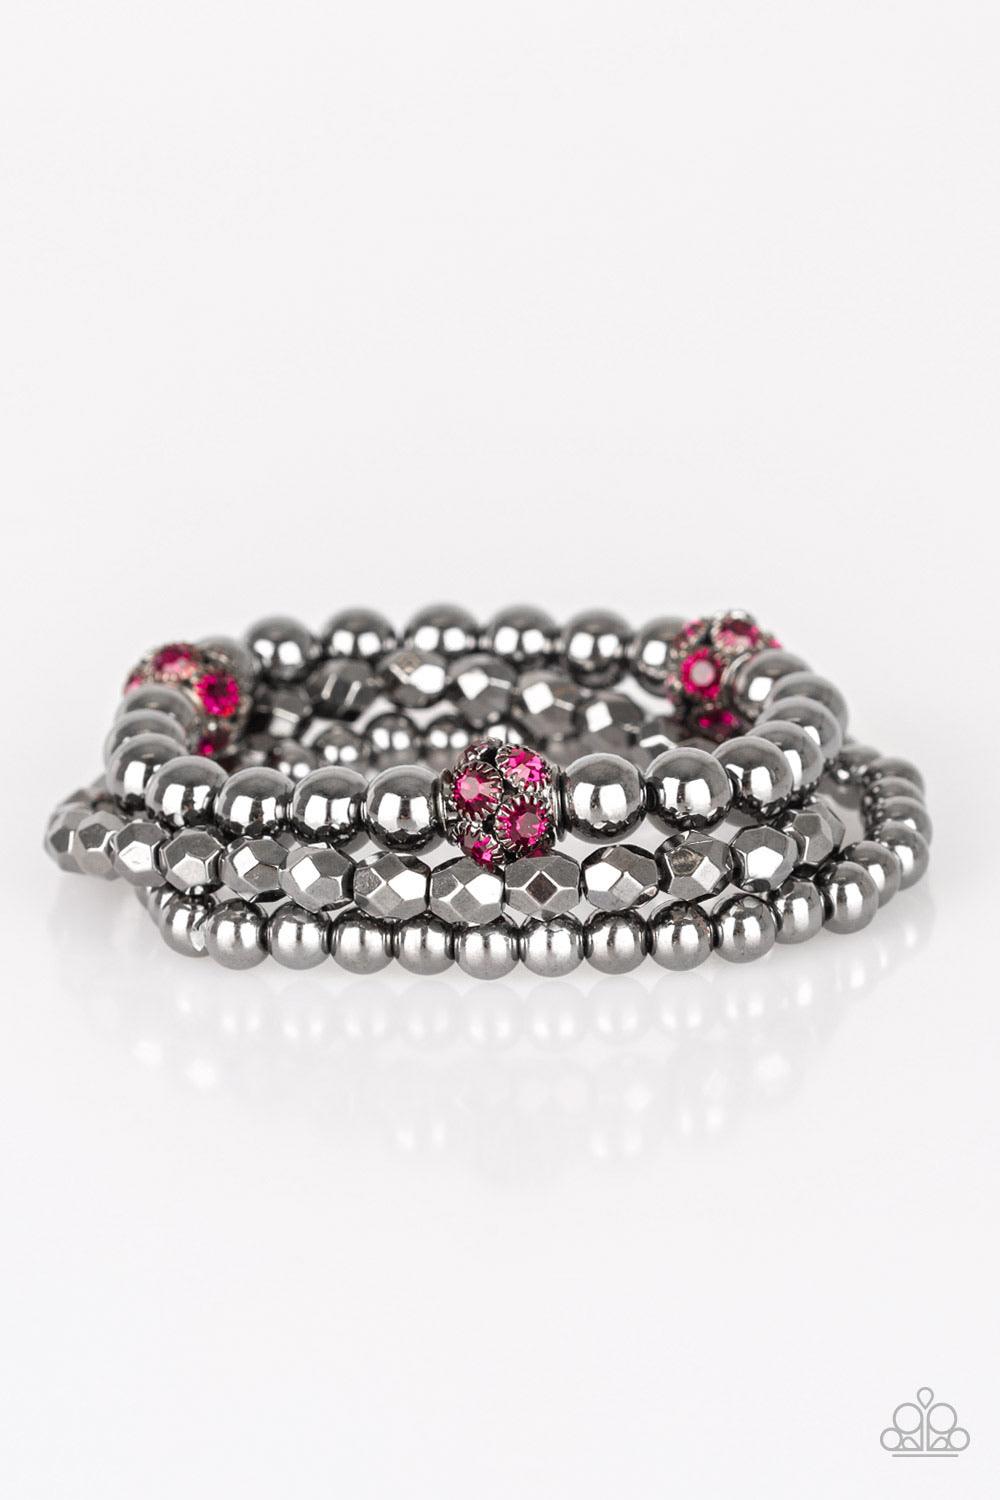 Noticeably Noir ~Pink - Beautifully Blinged